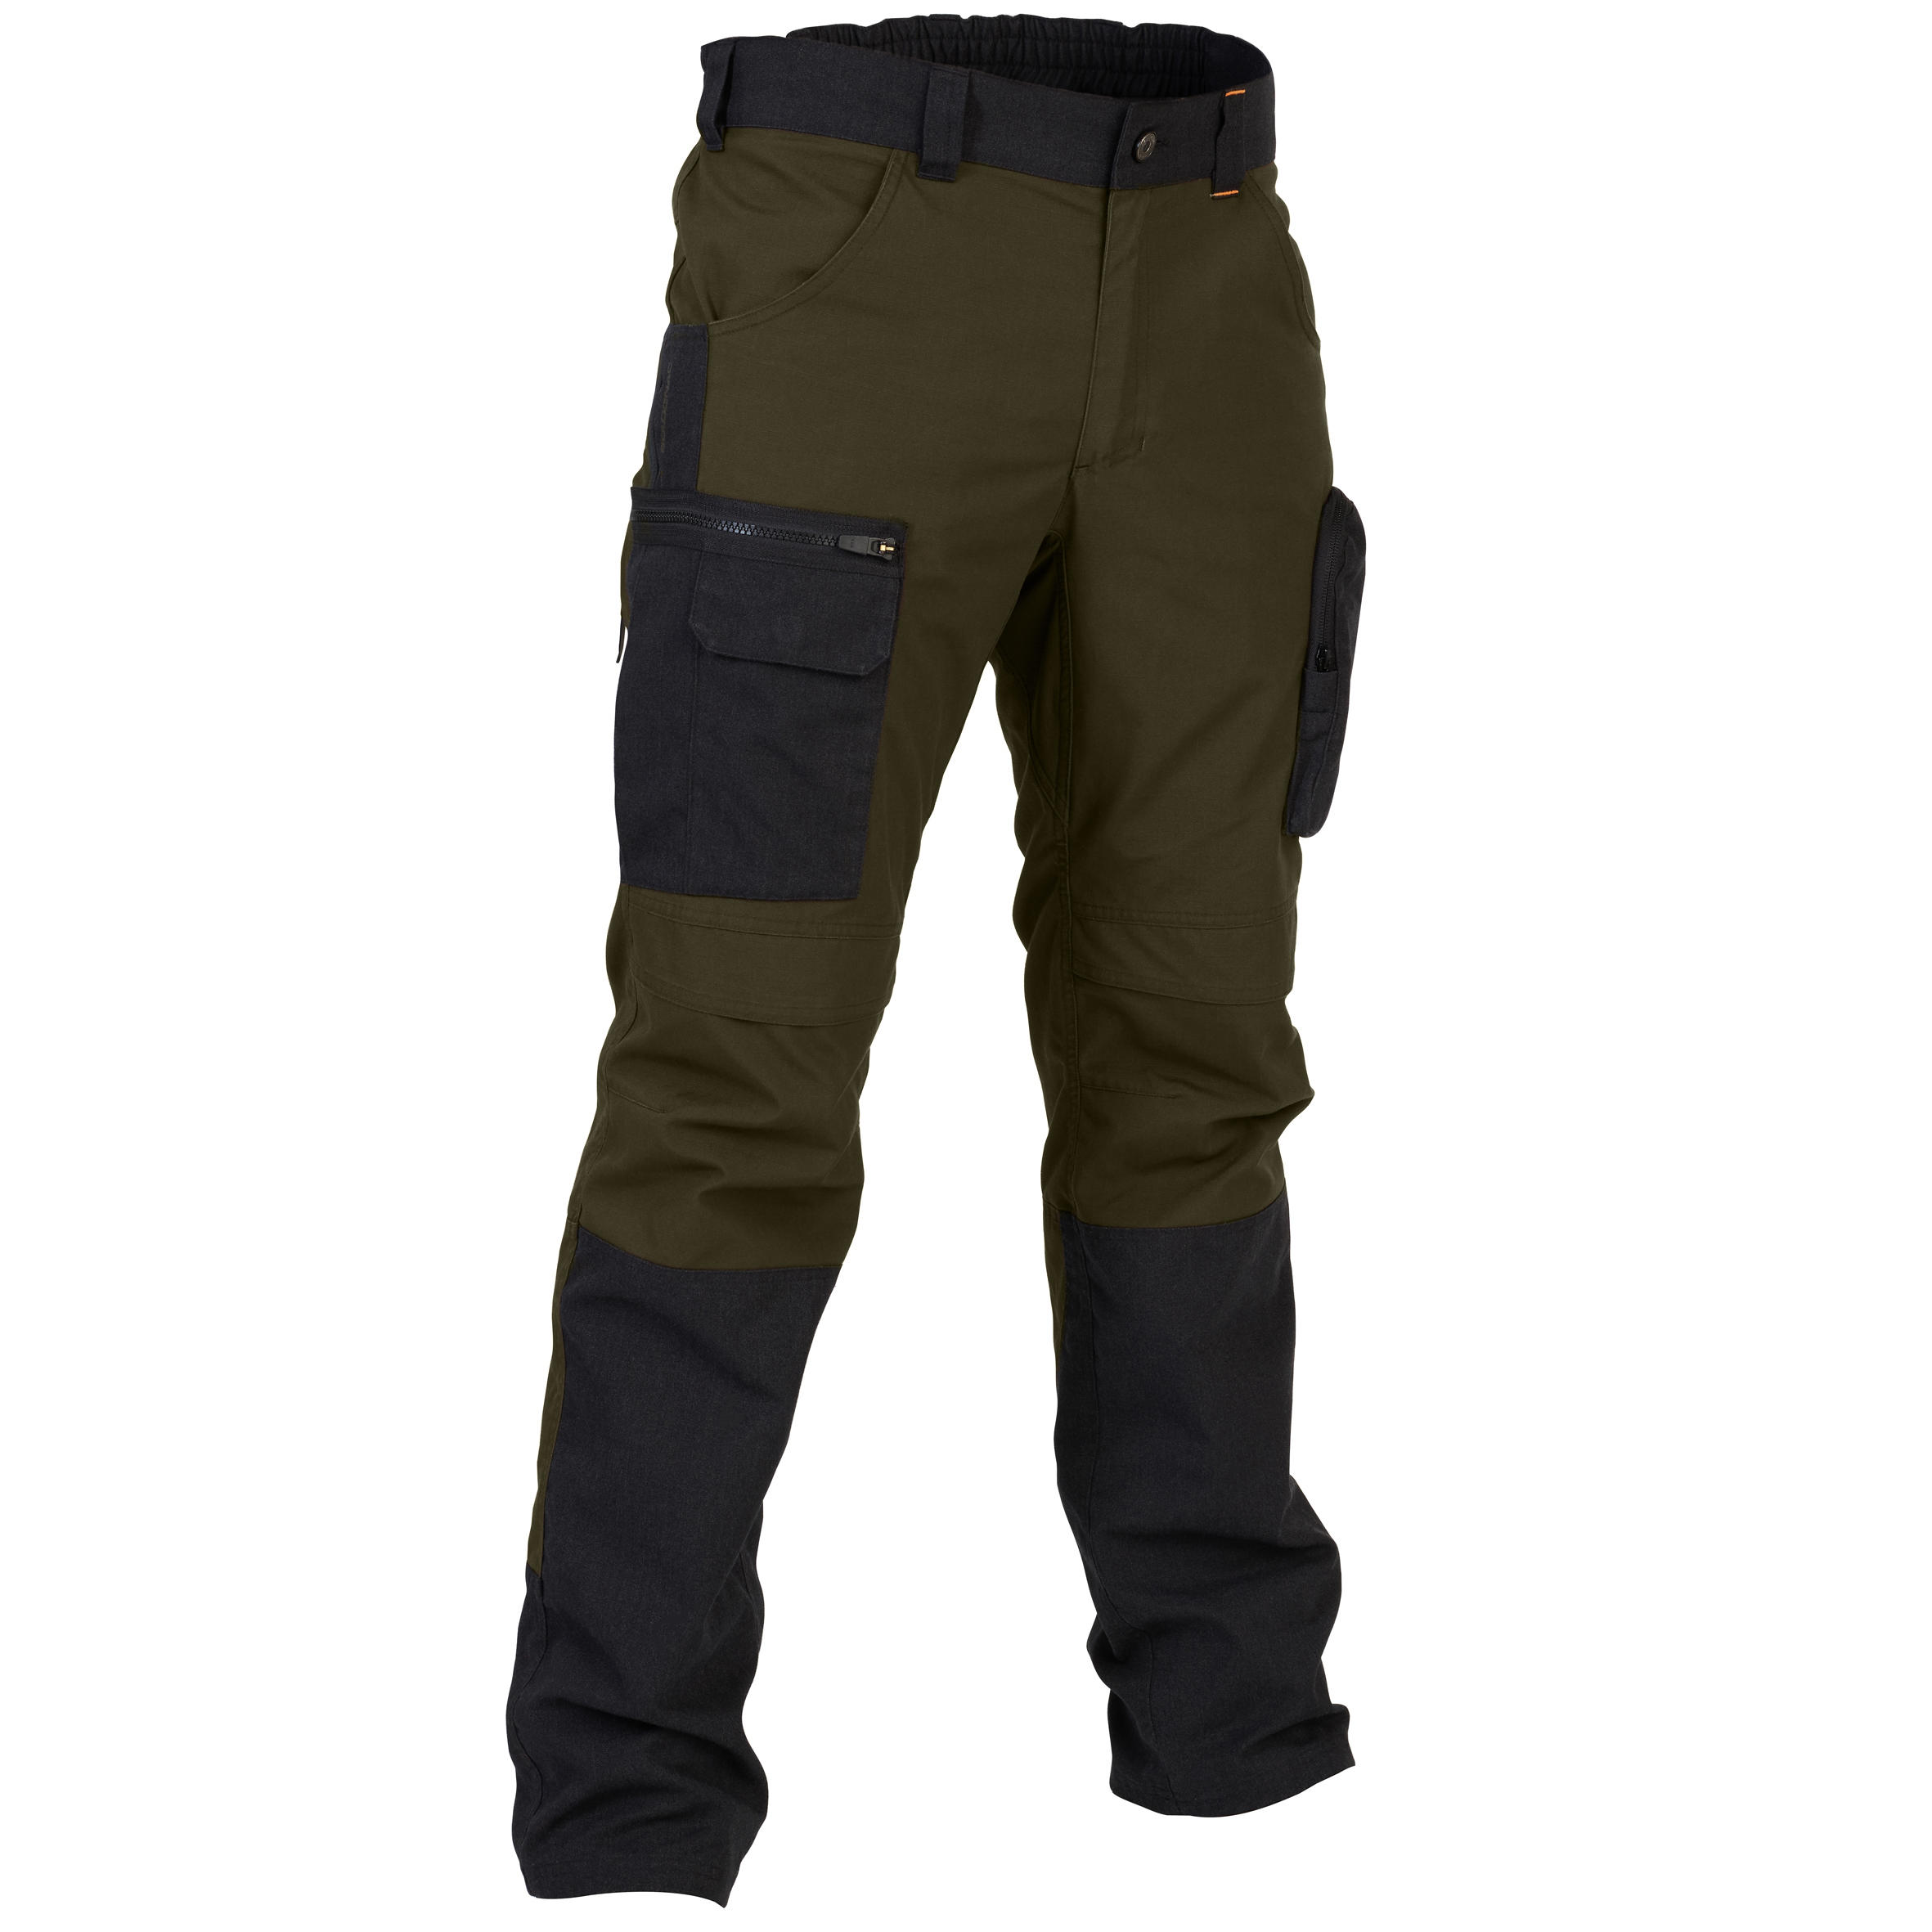 Hunting trousers Bois 900 durable and breathable - Decathlon